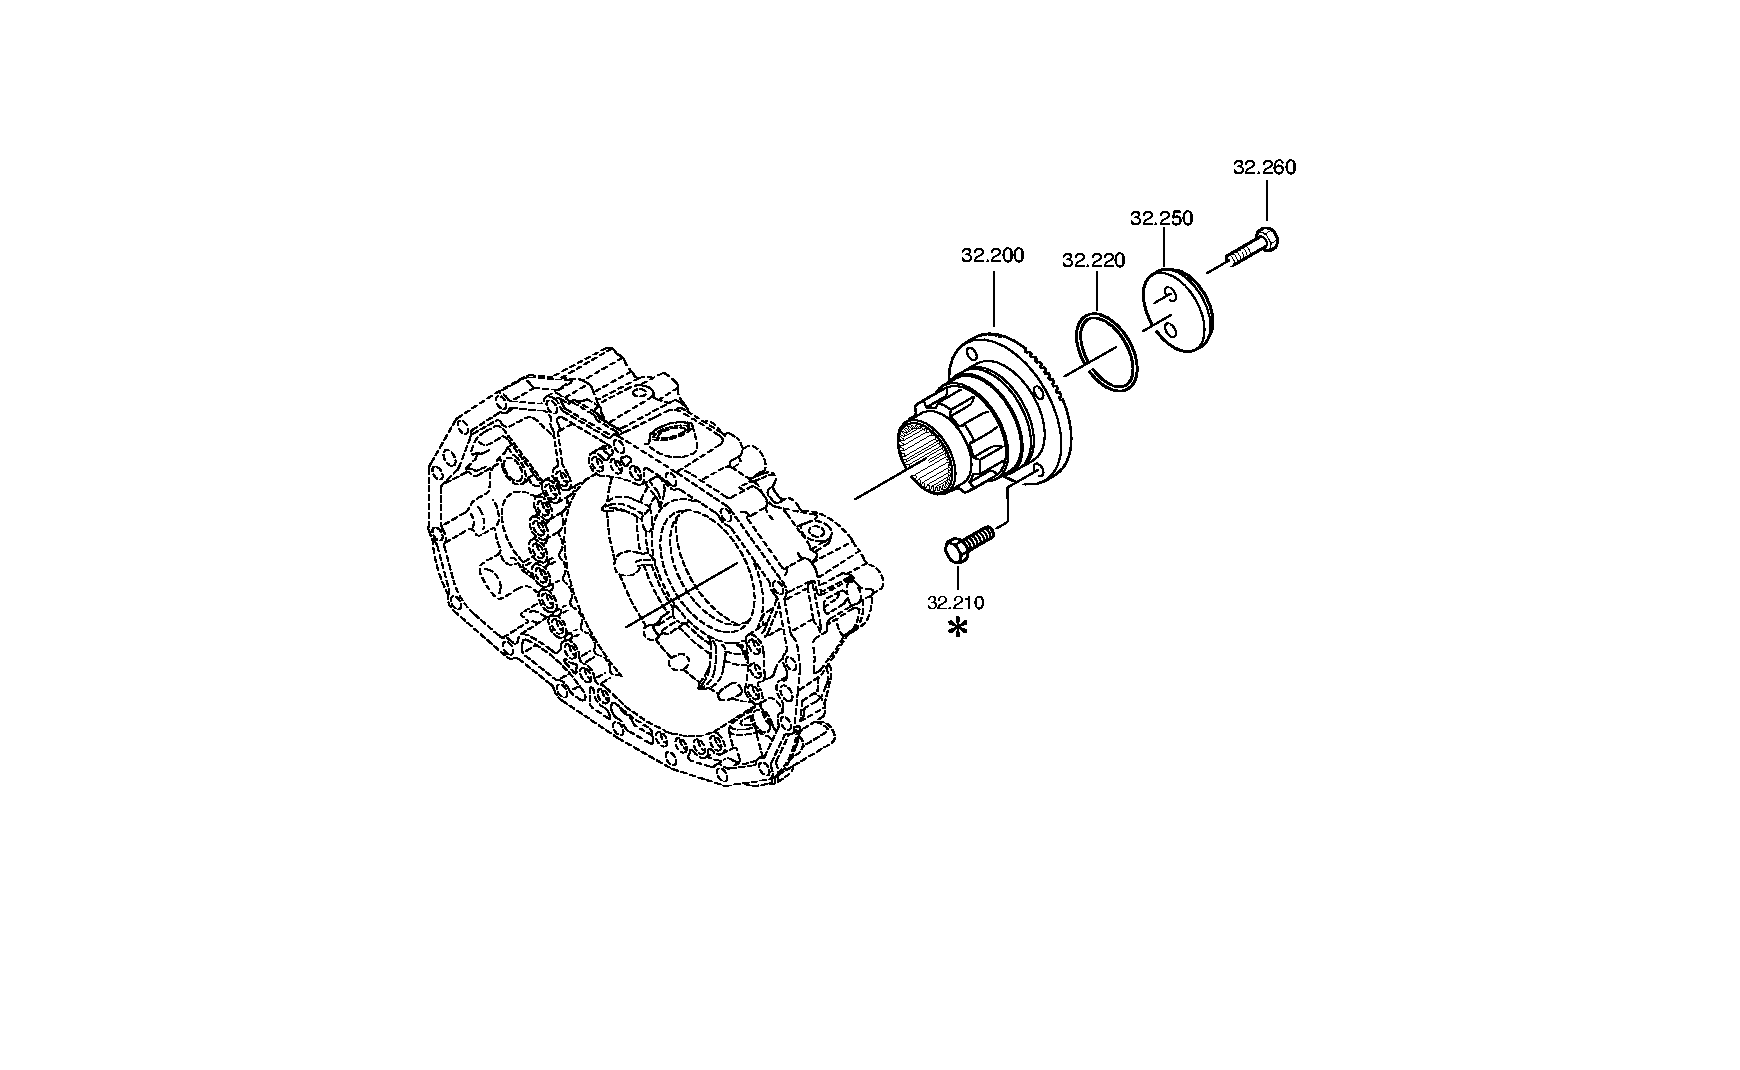 drawing for DAF 1929127 - HEXAGON SCREW (figure 4)